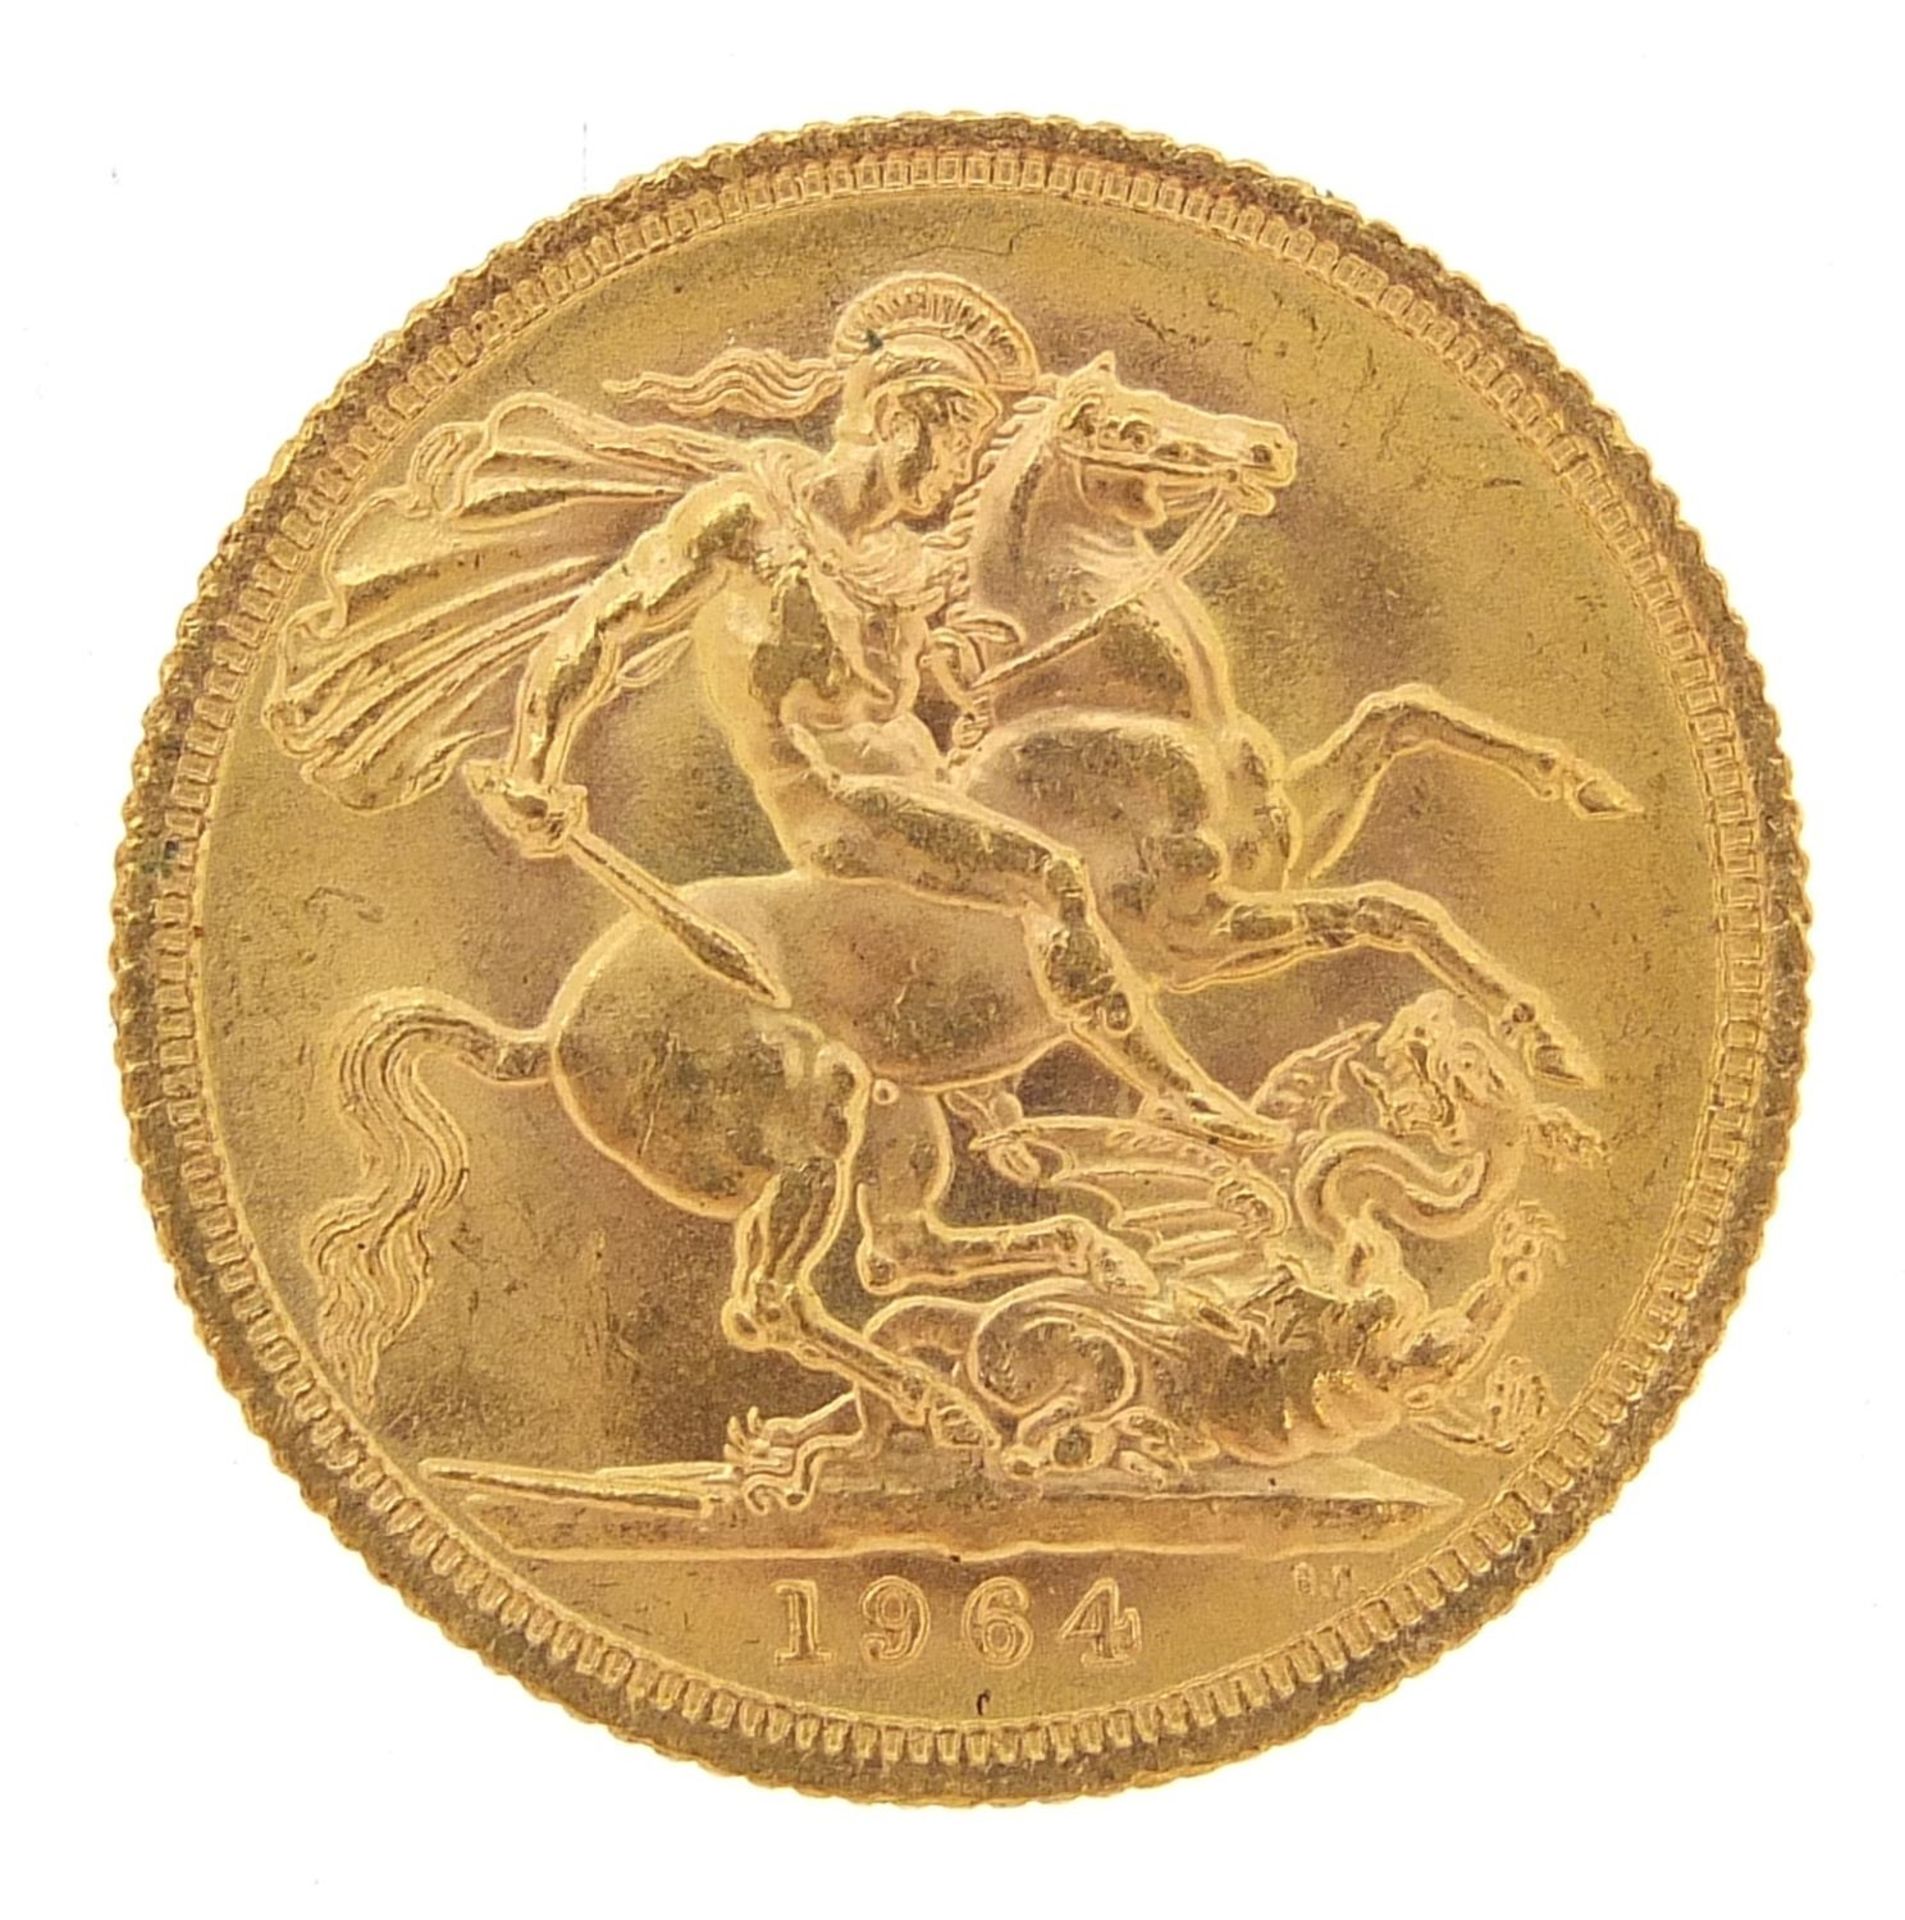 Elizabeth II 1964 gold sovereign - this lot is sold without buyer's premium